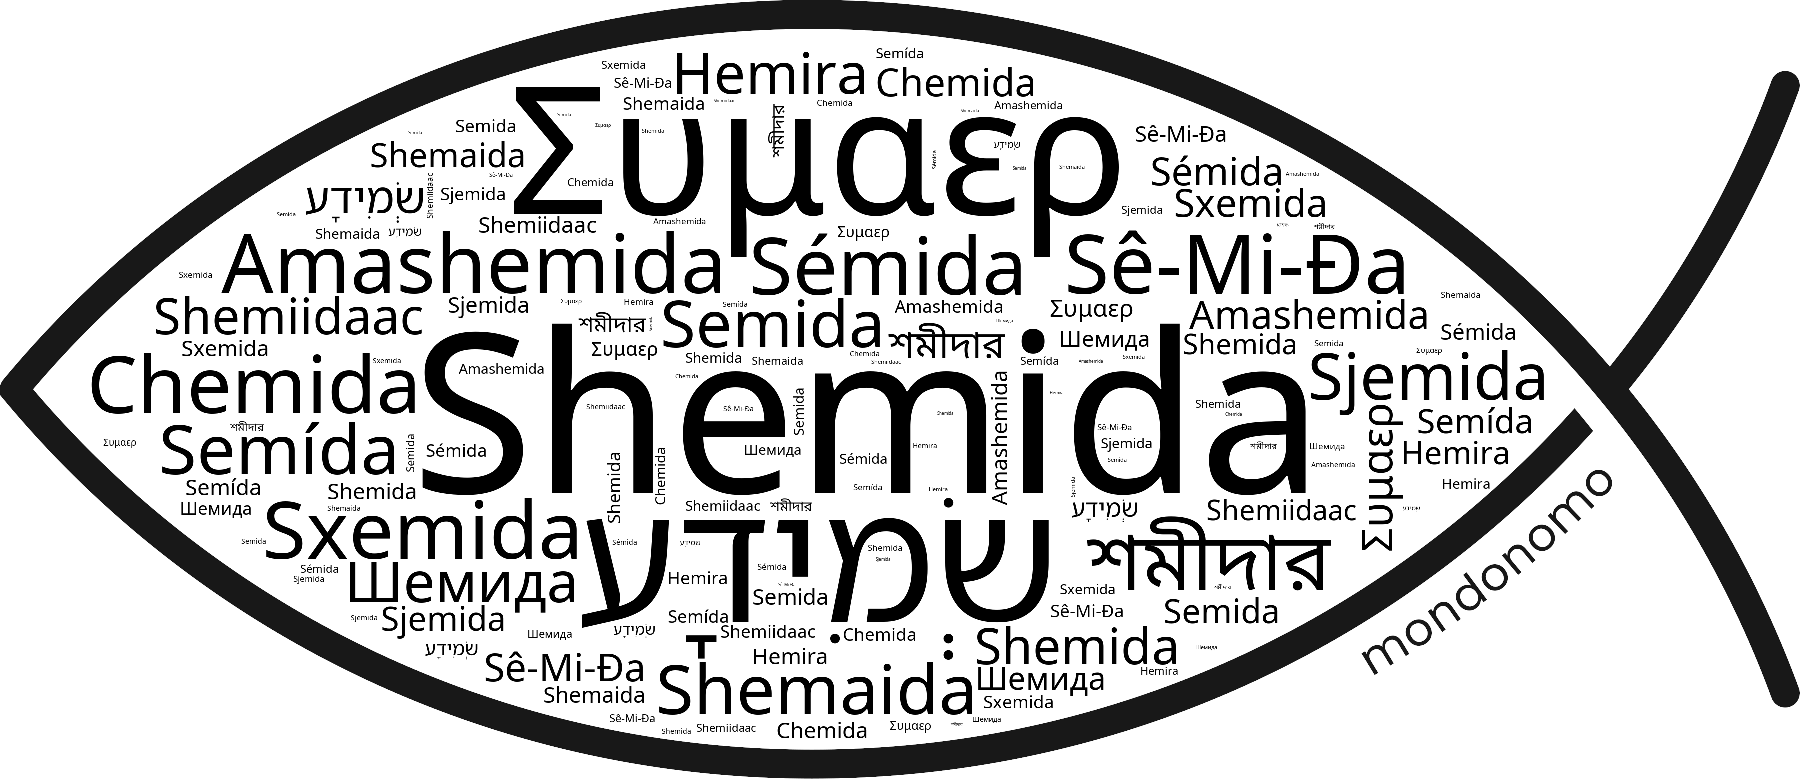 Name Shemida in the world's Bibles